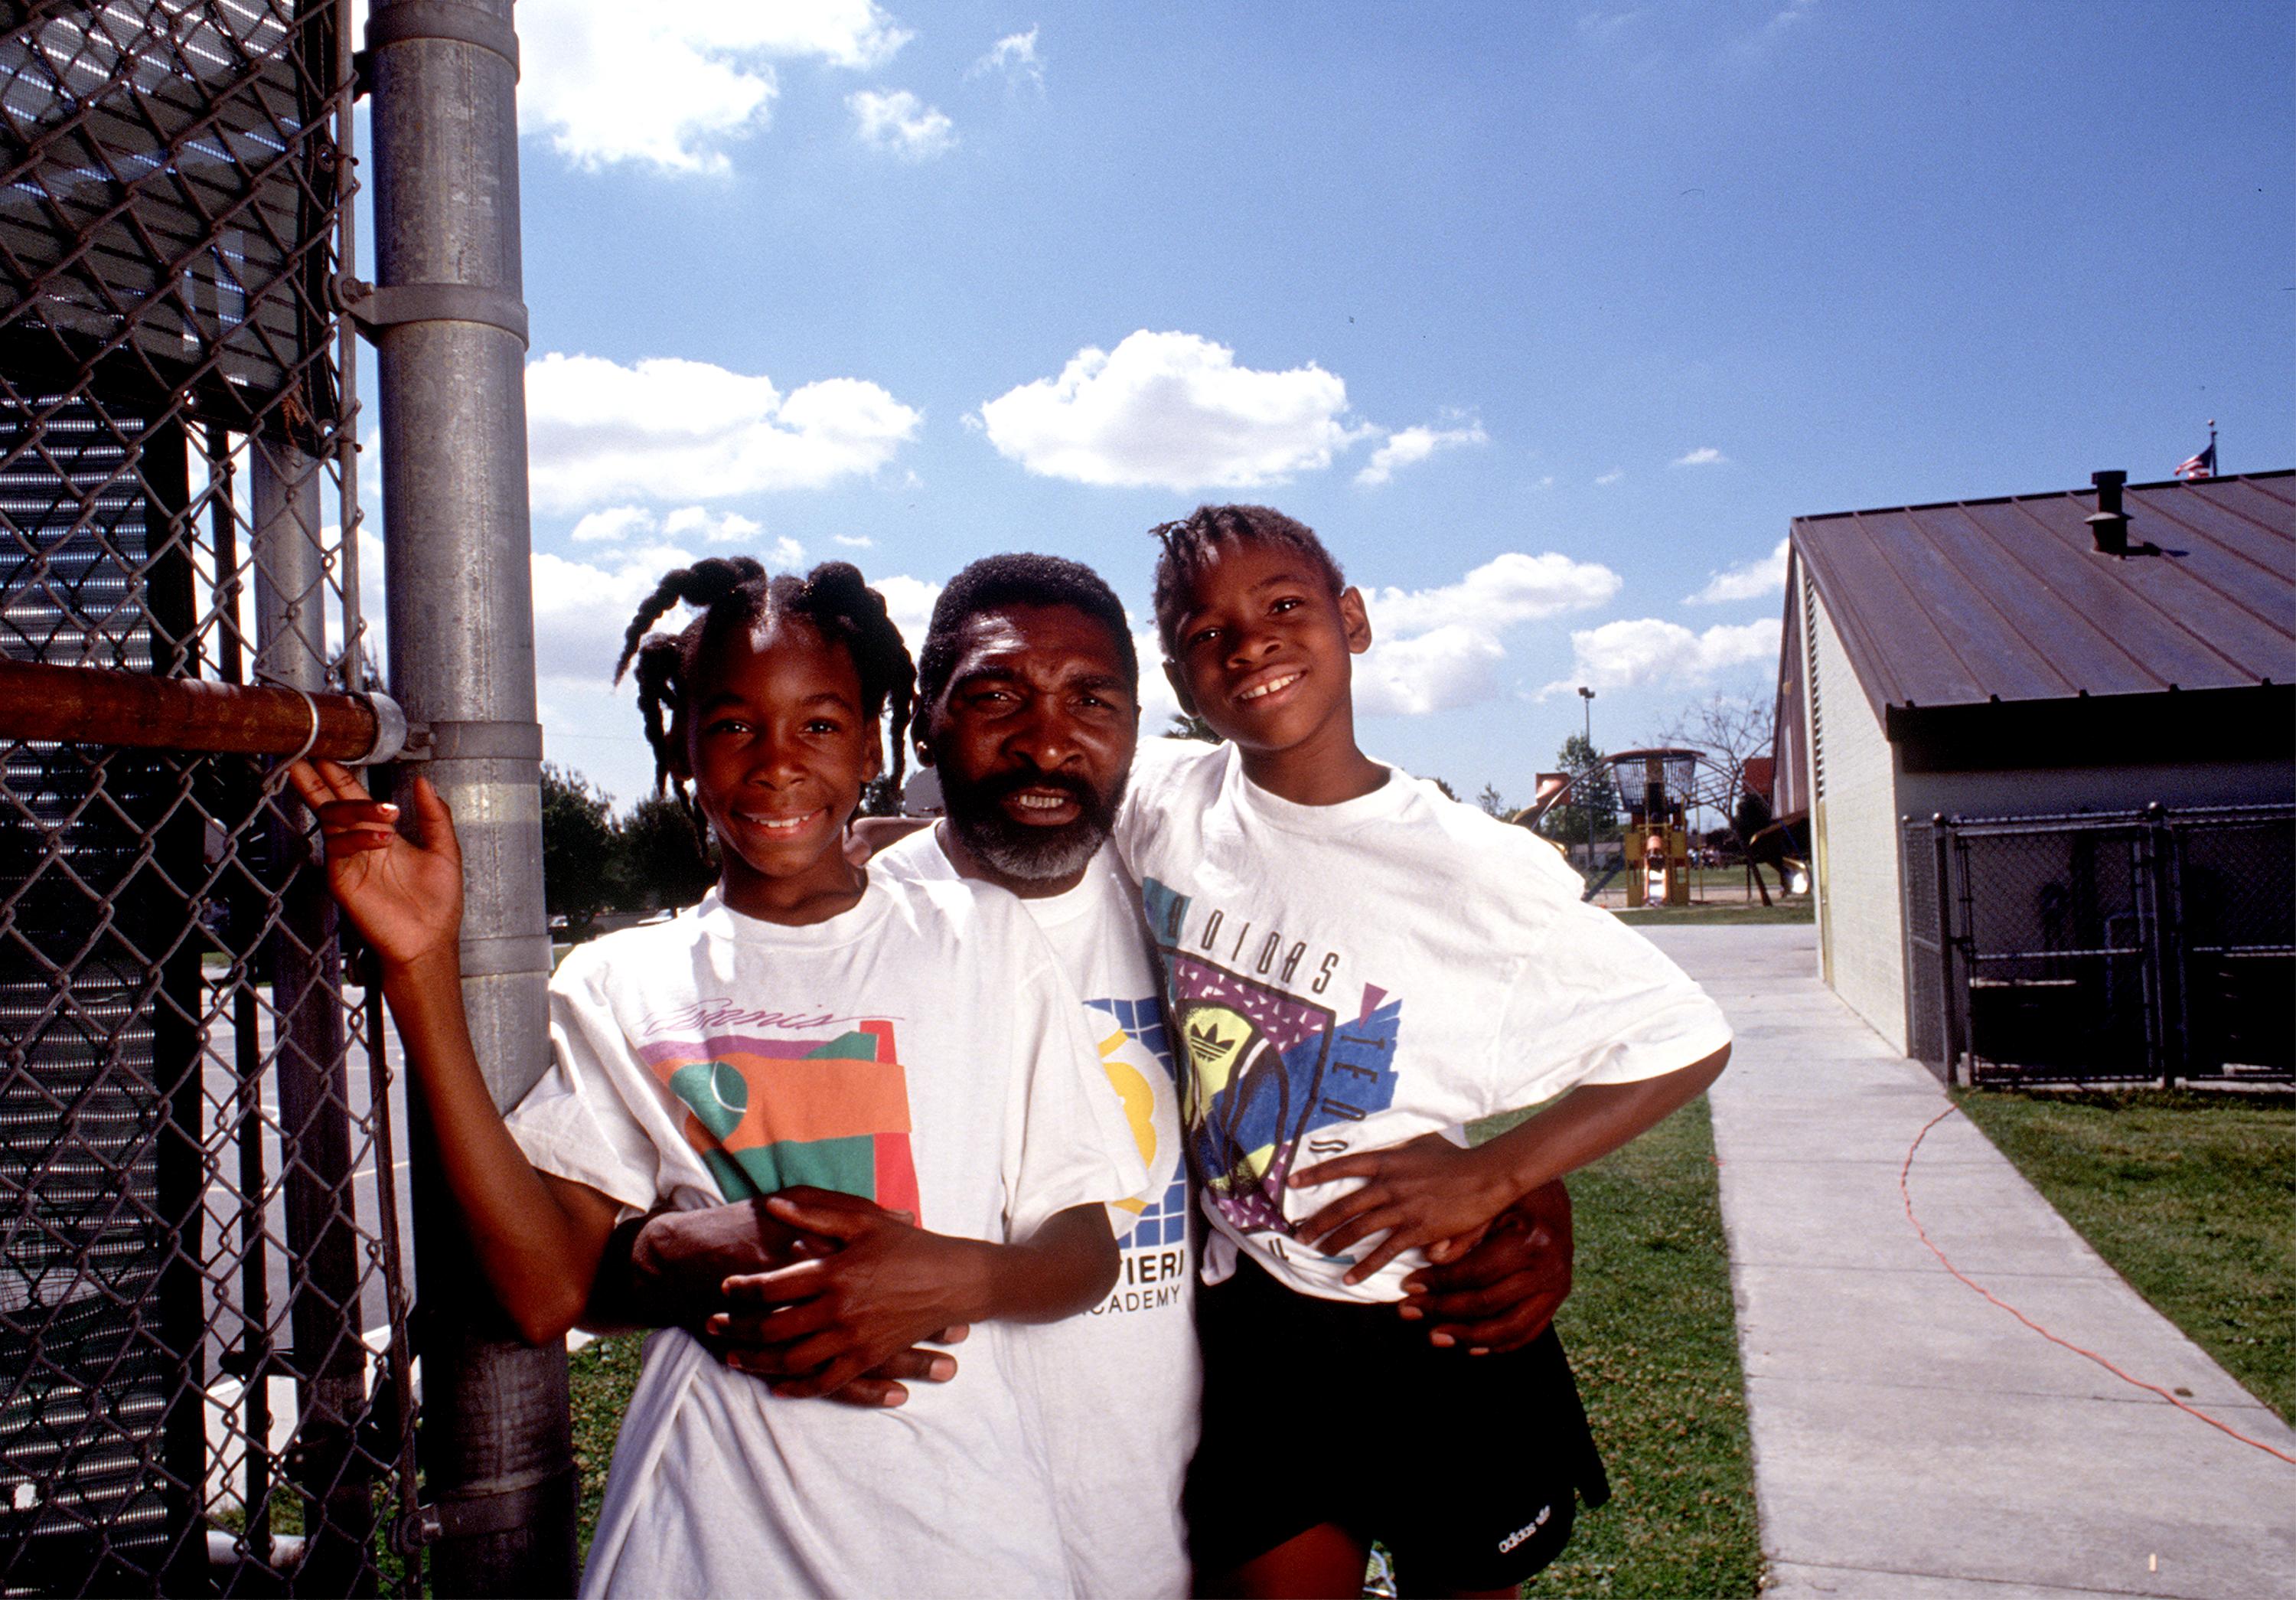 Richard Williams (C) is pictured with his daughters Venus (L) and Serena (R) in 1991, in Compton, California | Source: Getty Images